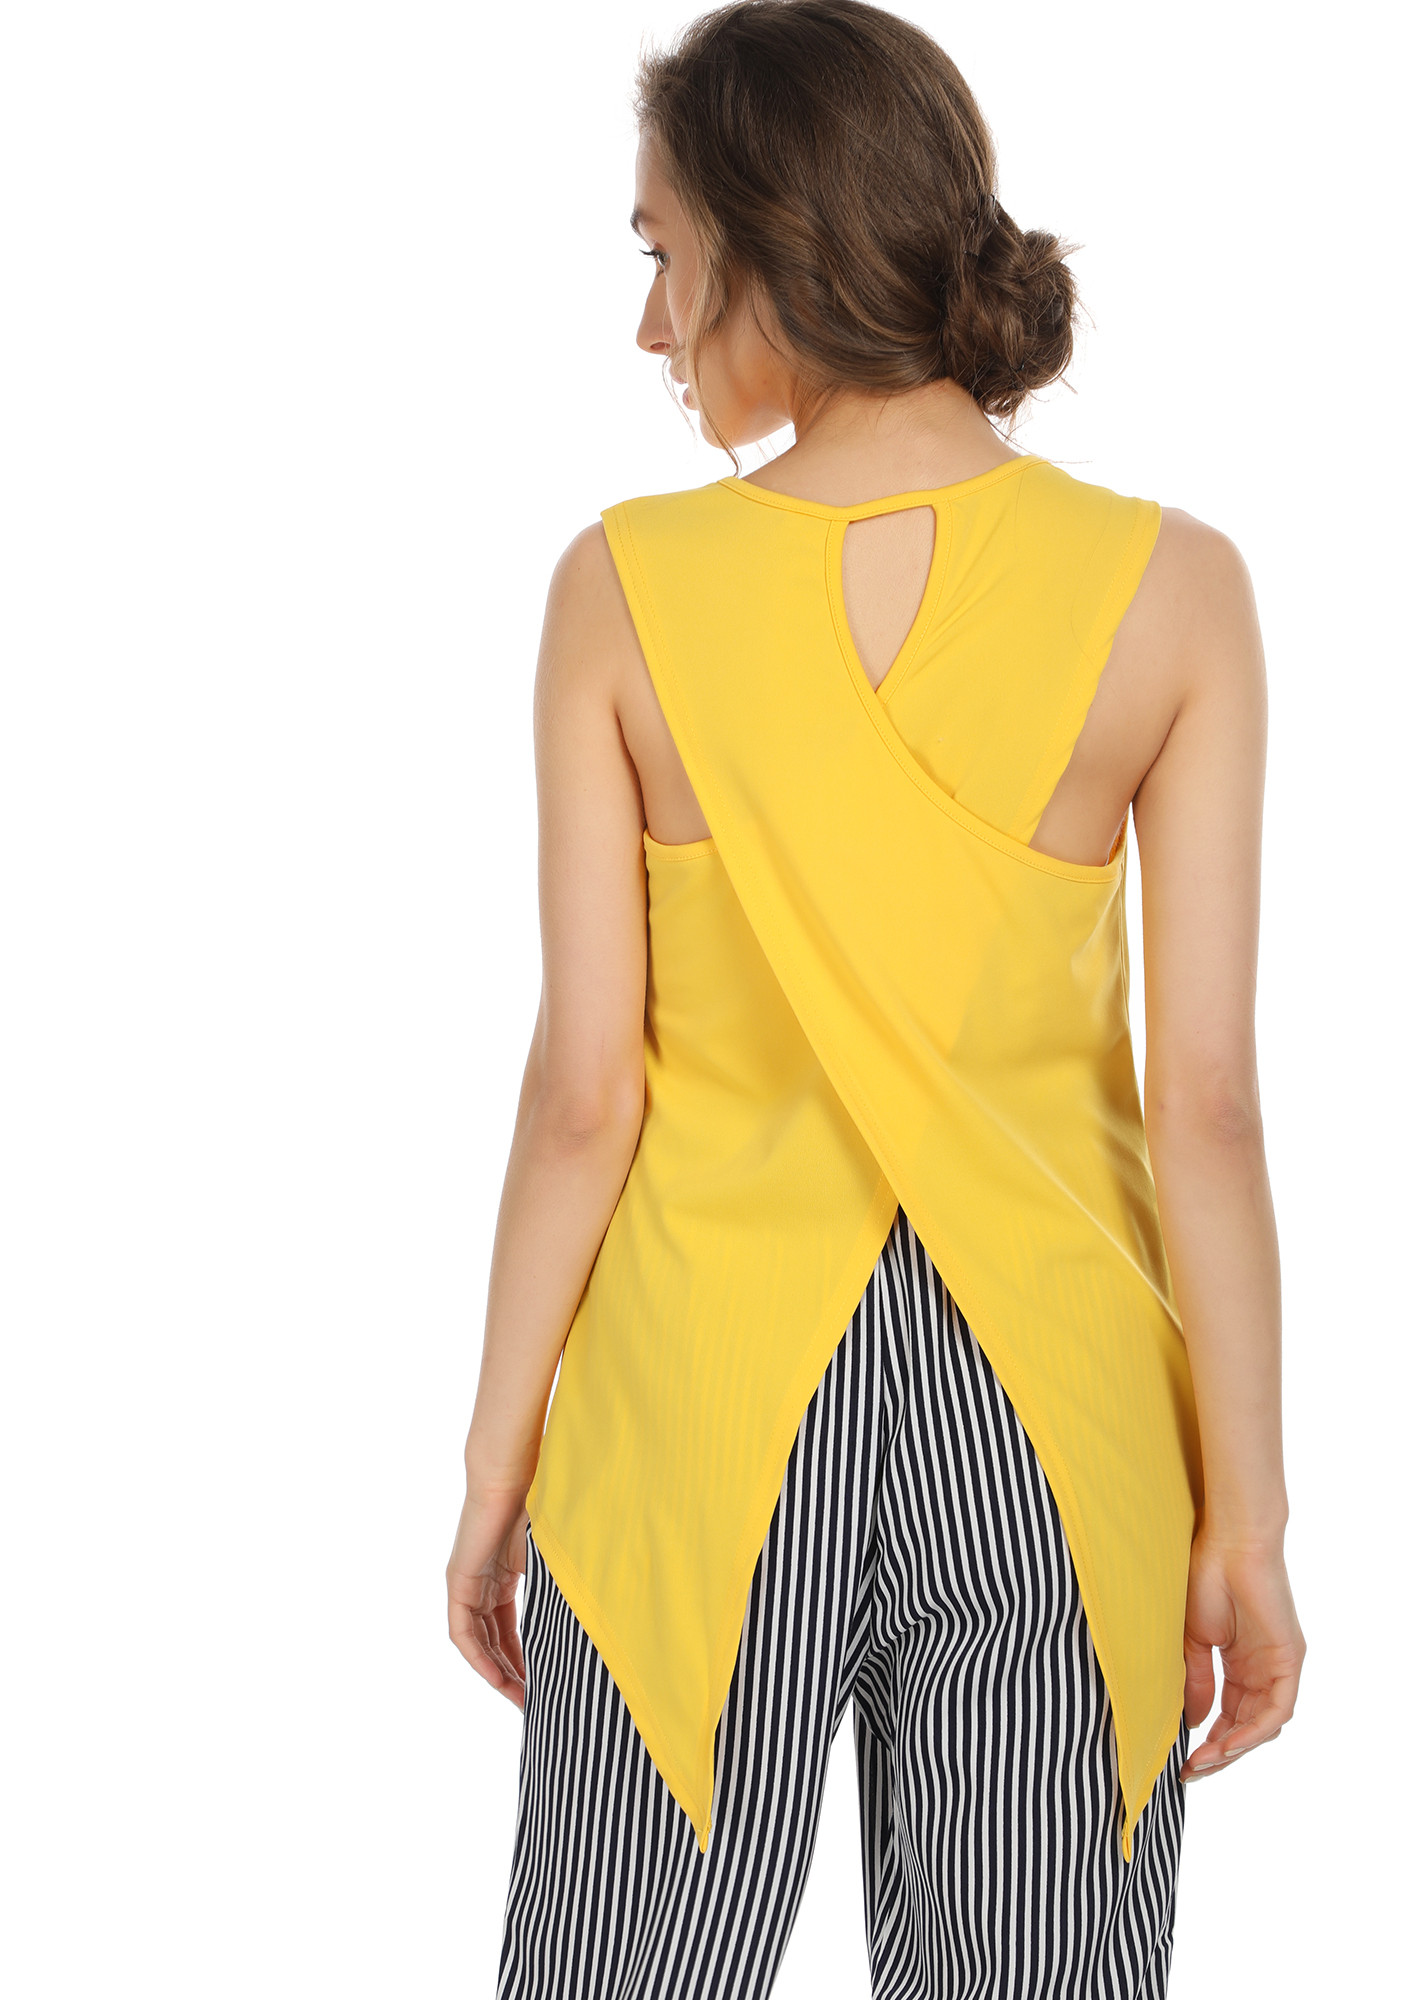 SUNNY SIDE UP YELLOW TOP